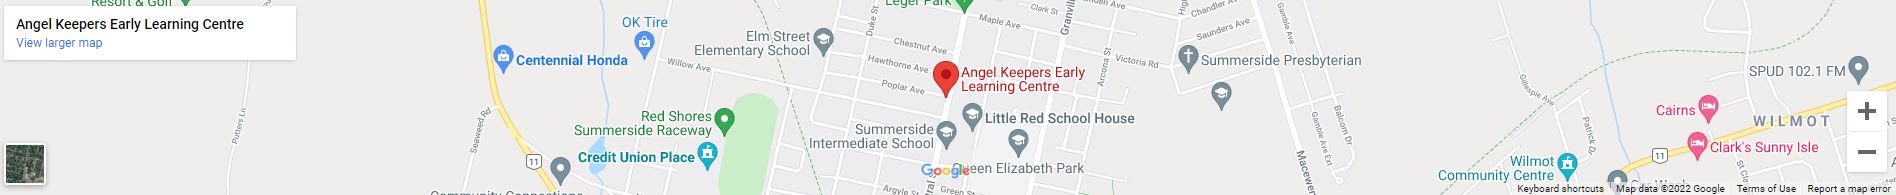 Angel Keepers Early Learning Centre